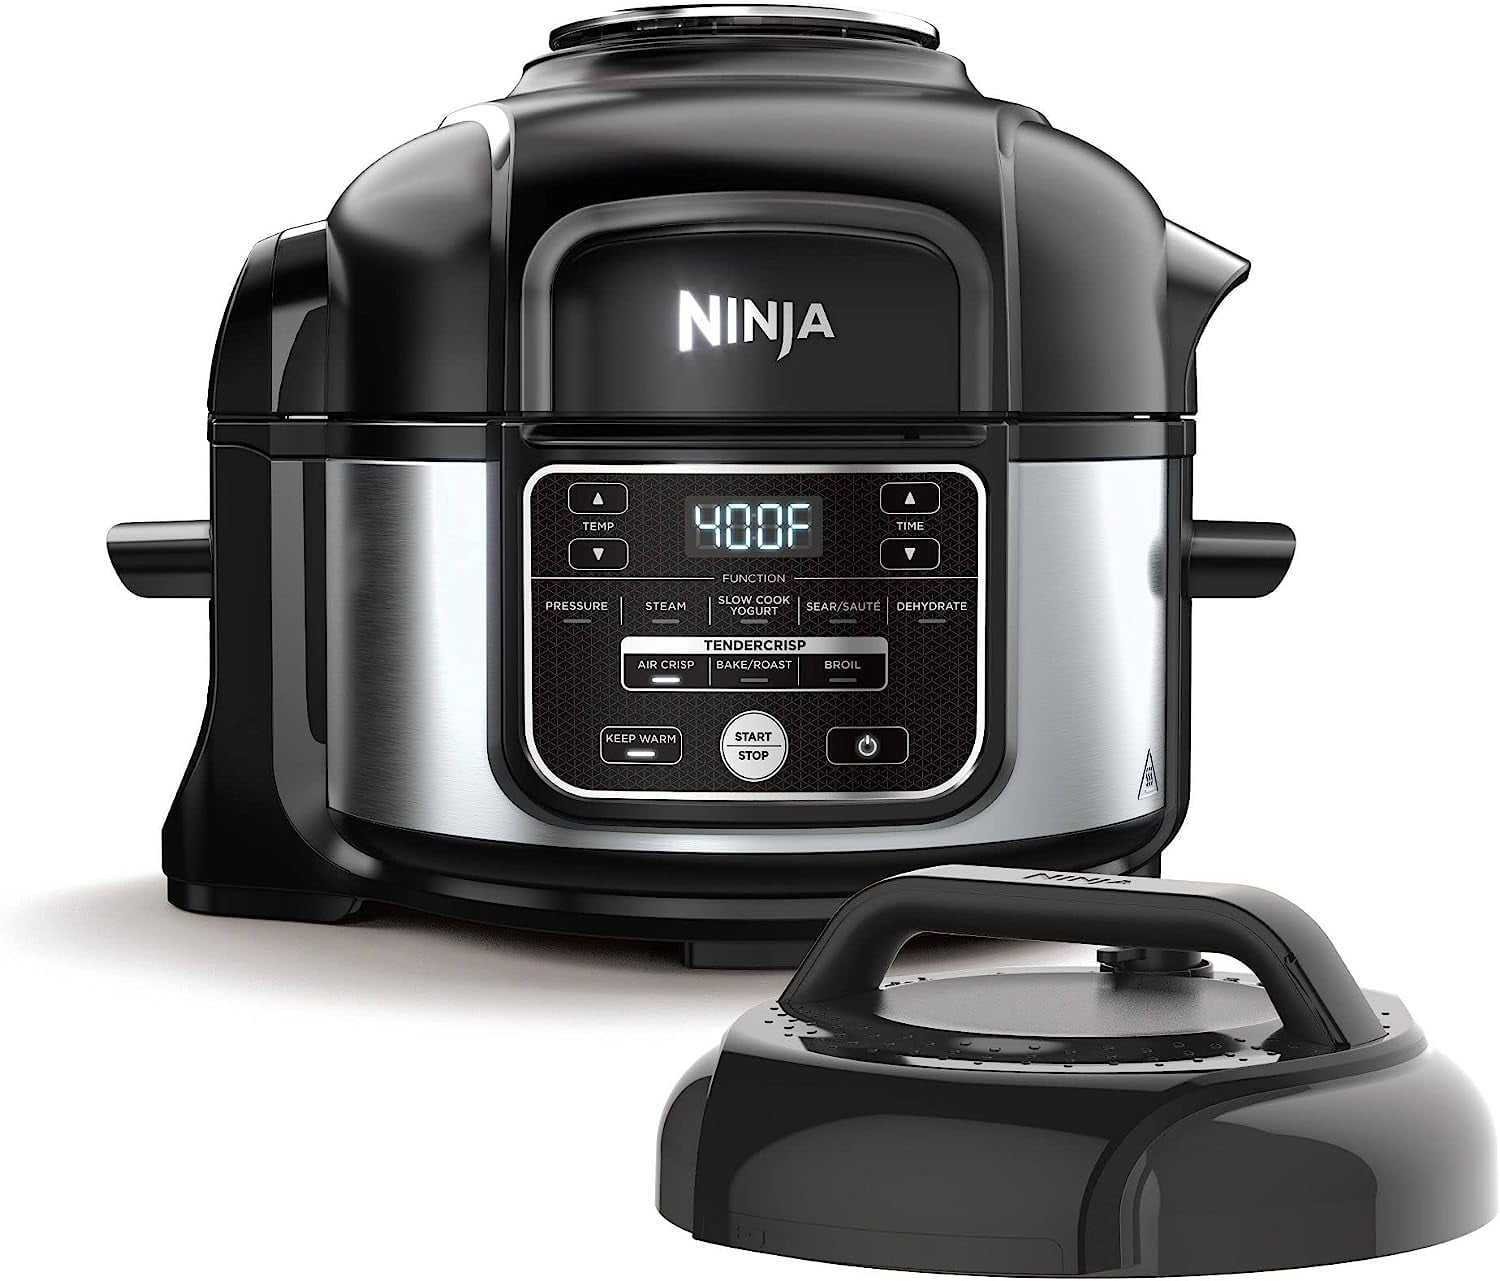 I Bought A Ninja Foodi 10-In-1 For Only $85 At Target! Full Review